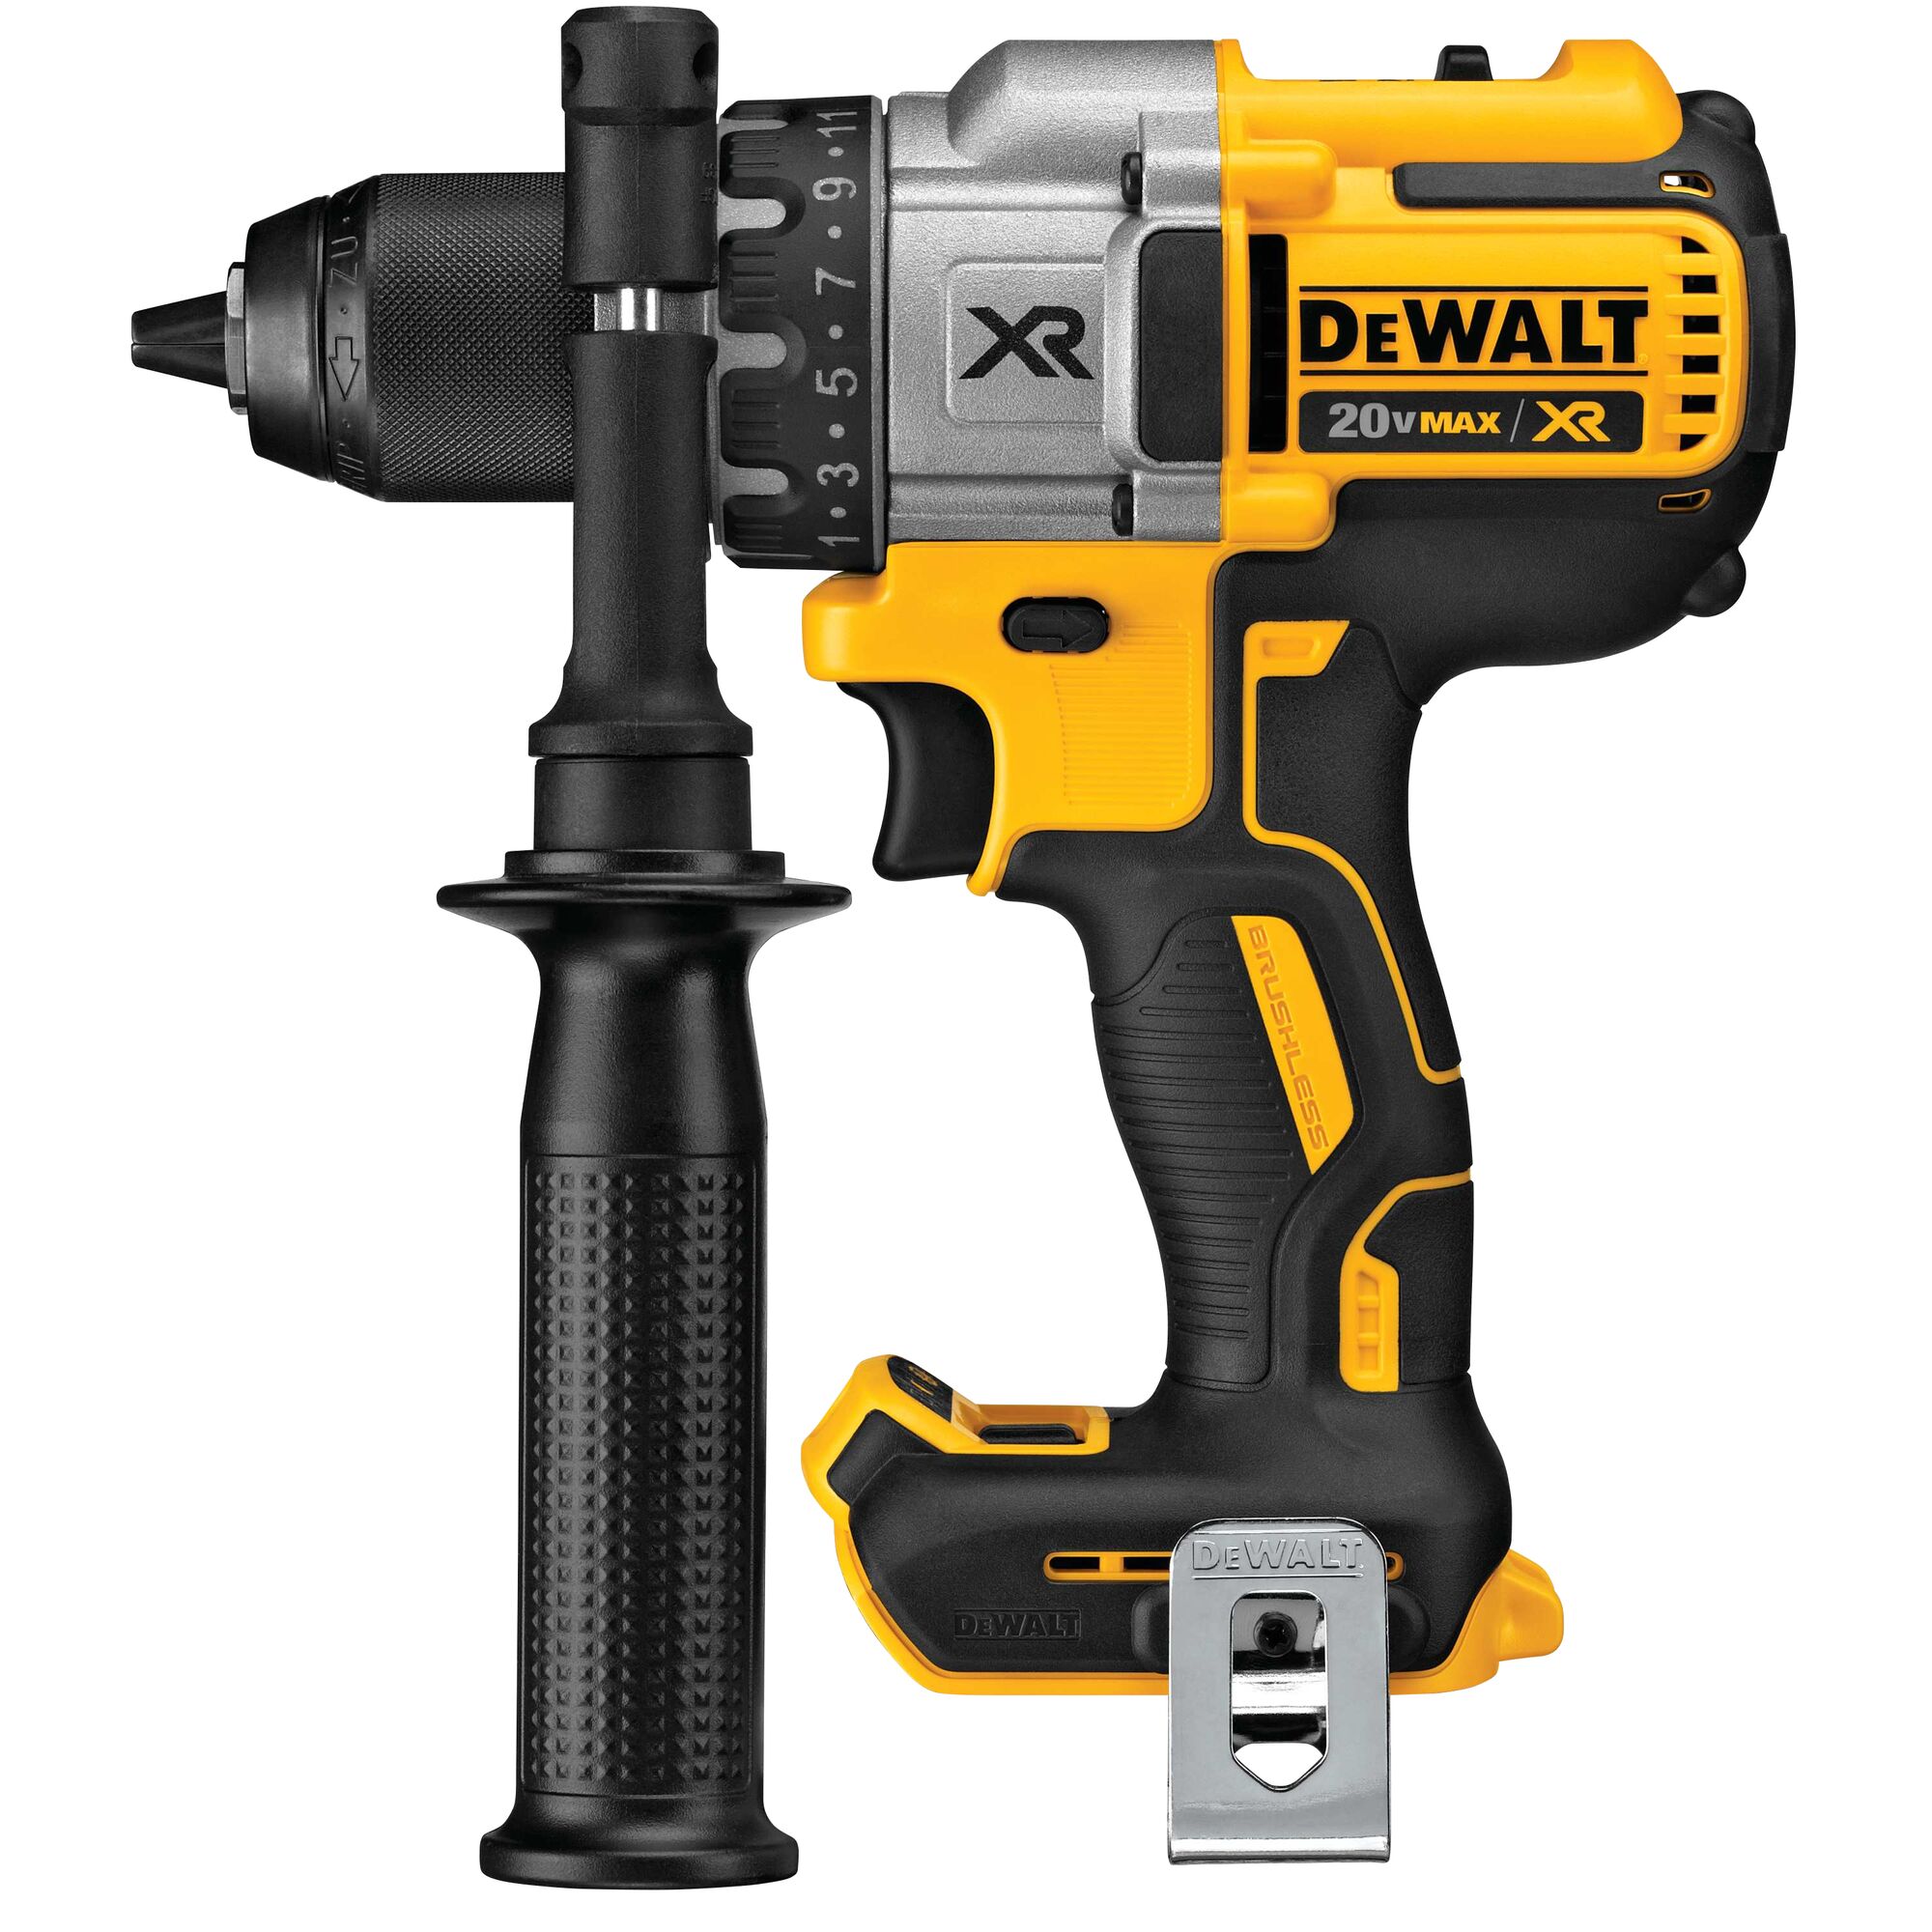 DEWALT 20-volt Max 1/2-in Brushless Cordless Drill in the Drills